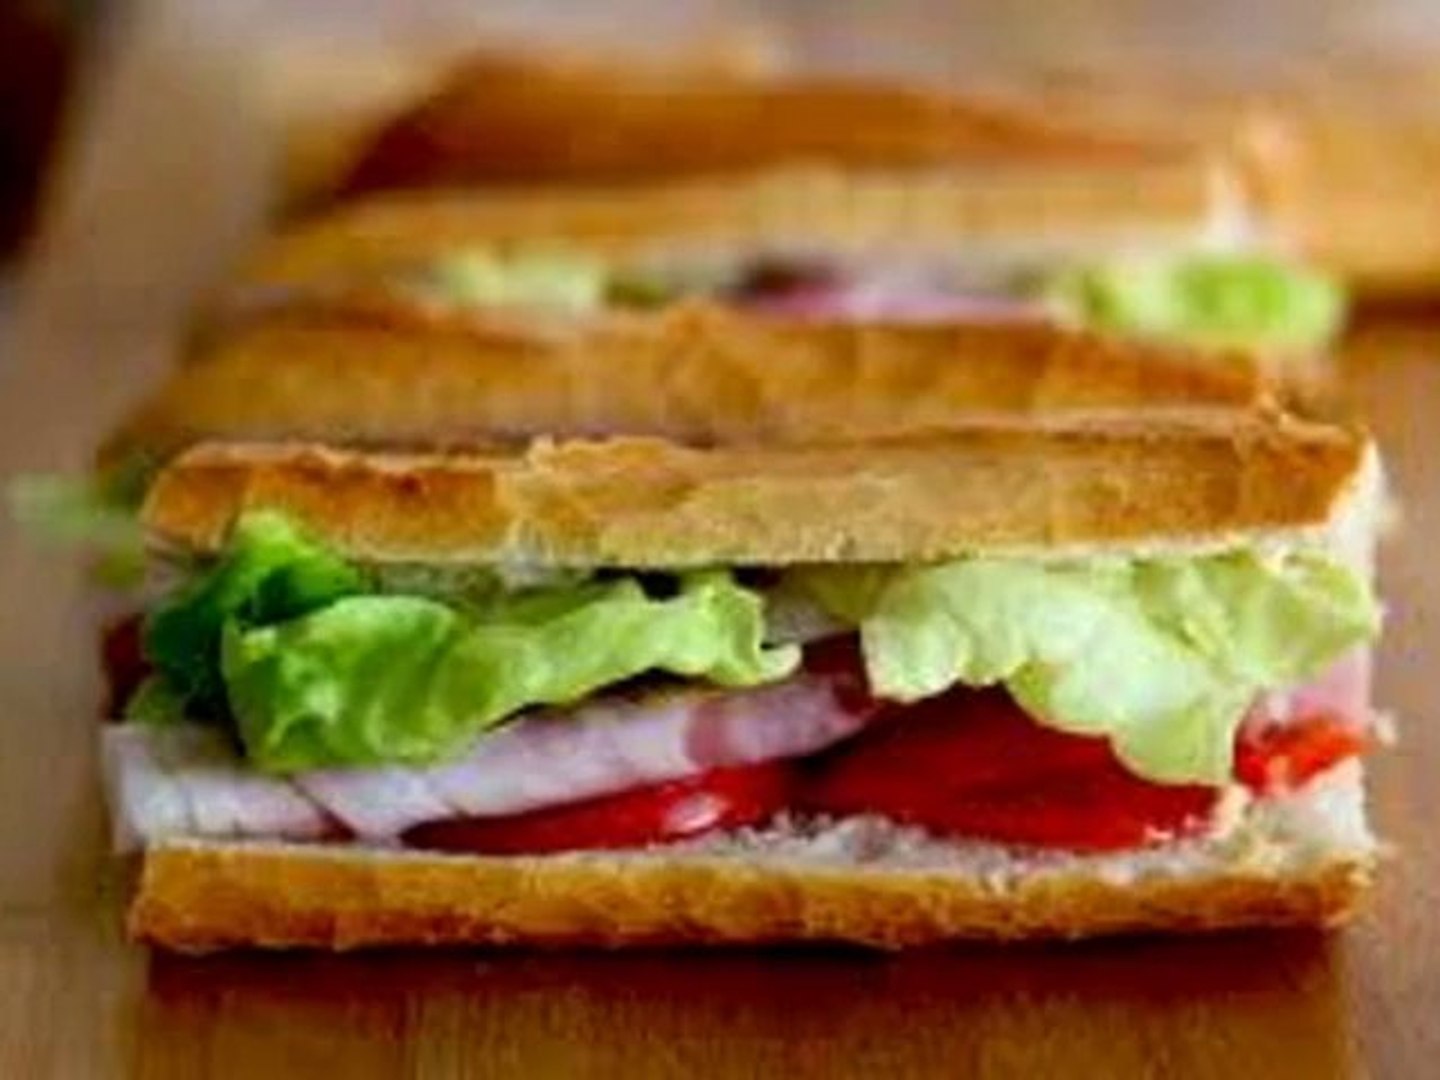 How To Make Sandwich At Home - video Dailymotion